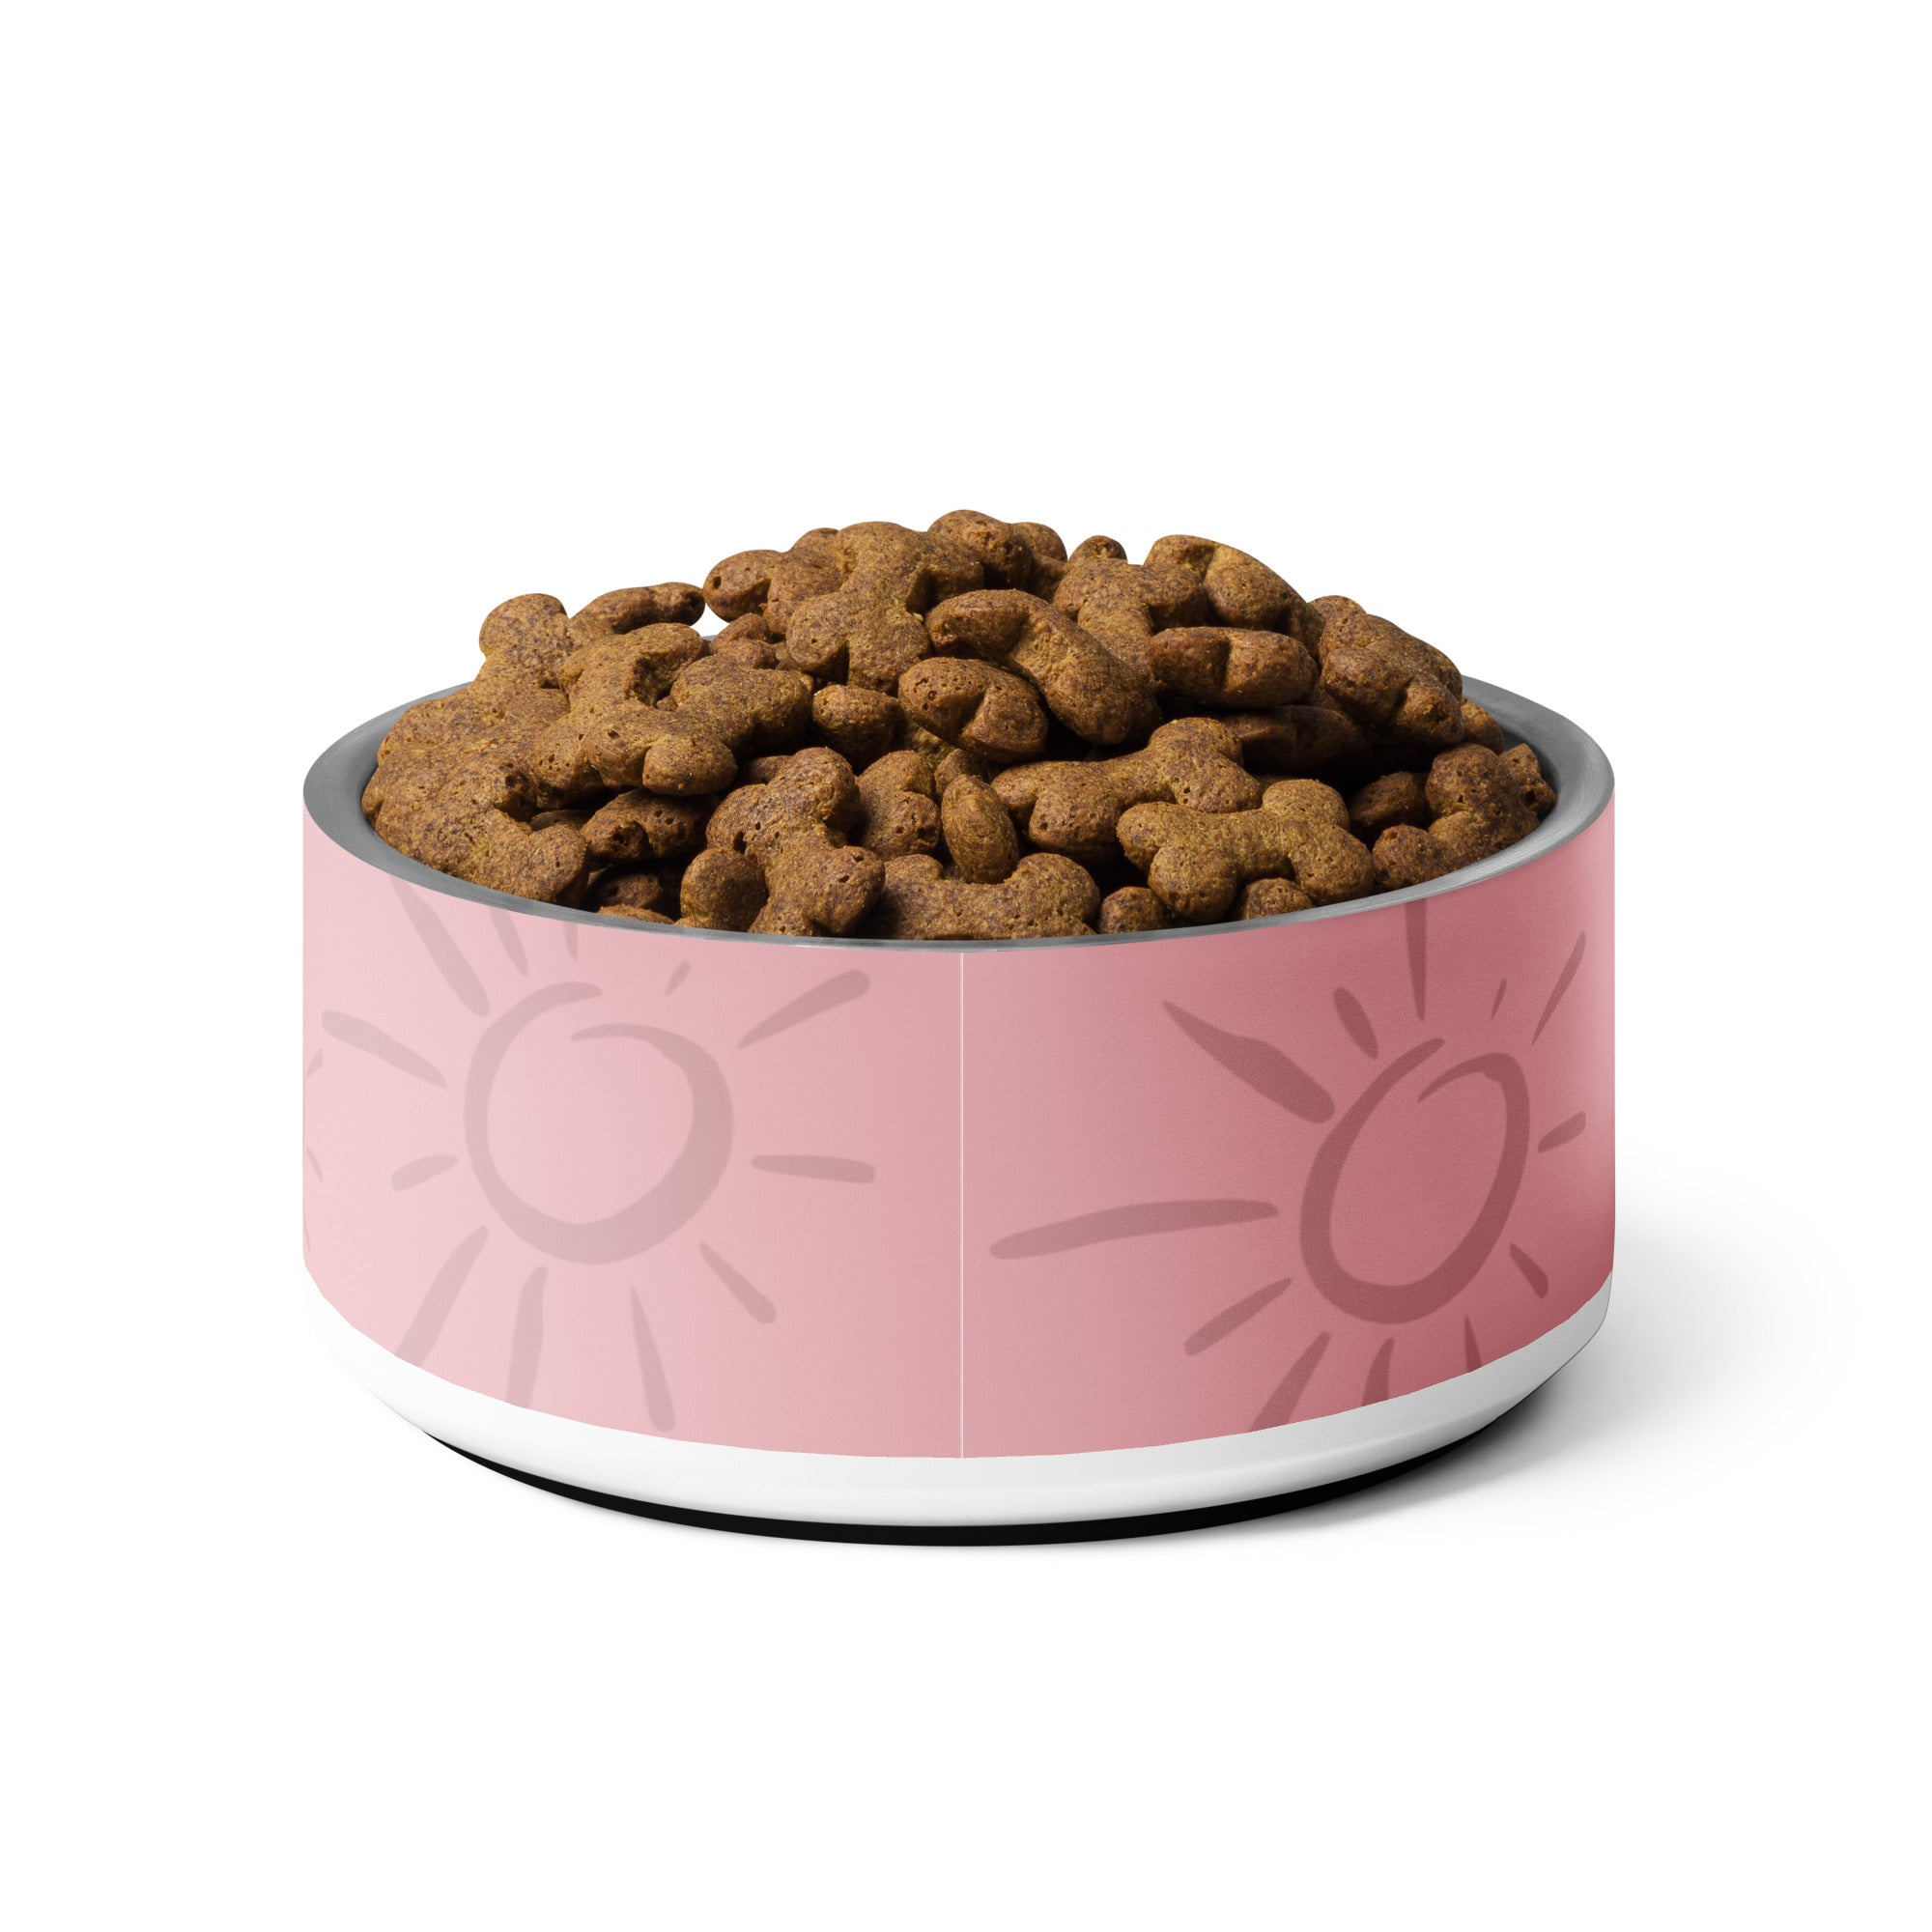 Dr. Laura: Everyday Pet Bowl